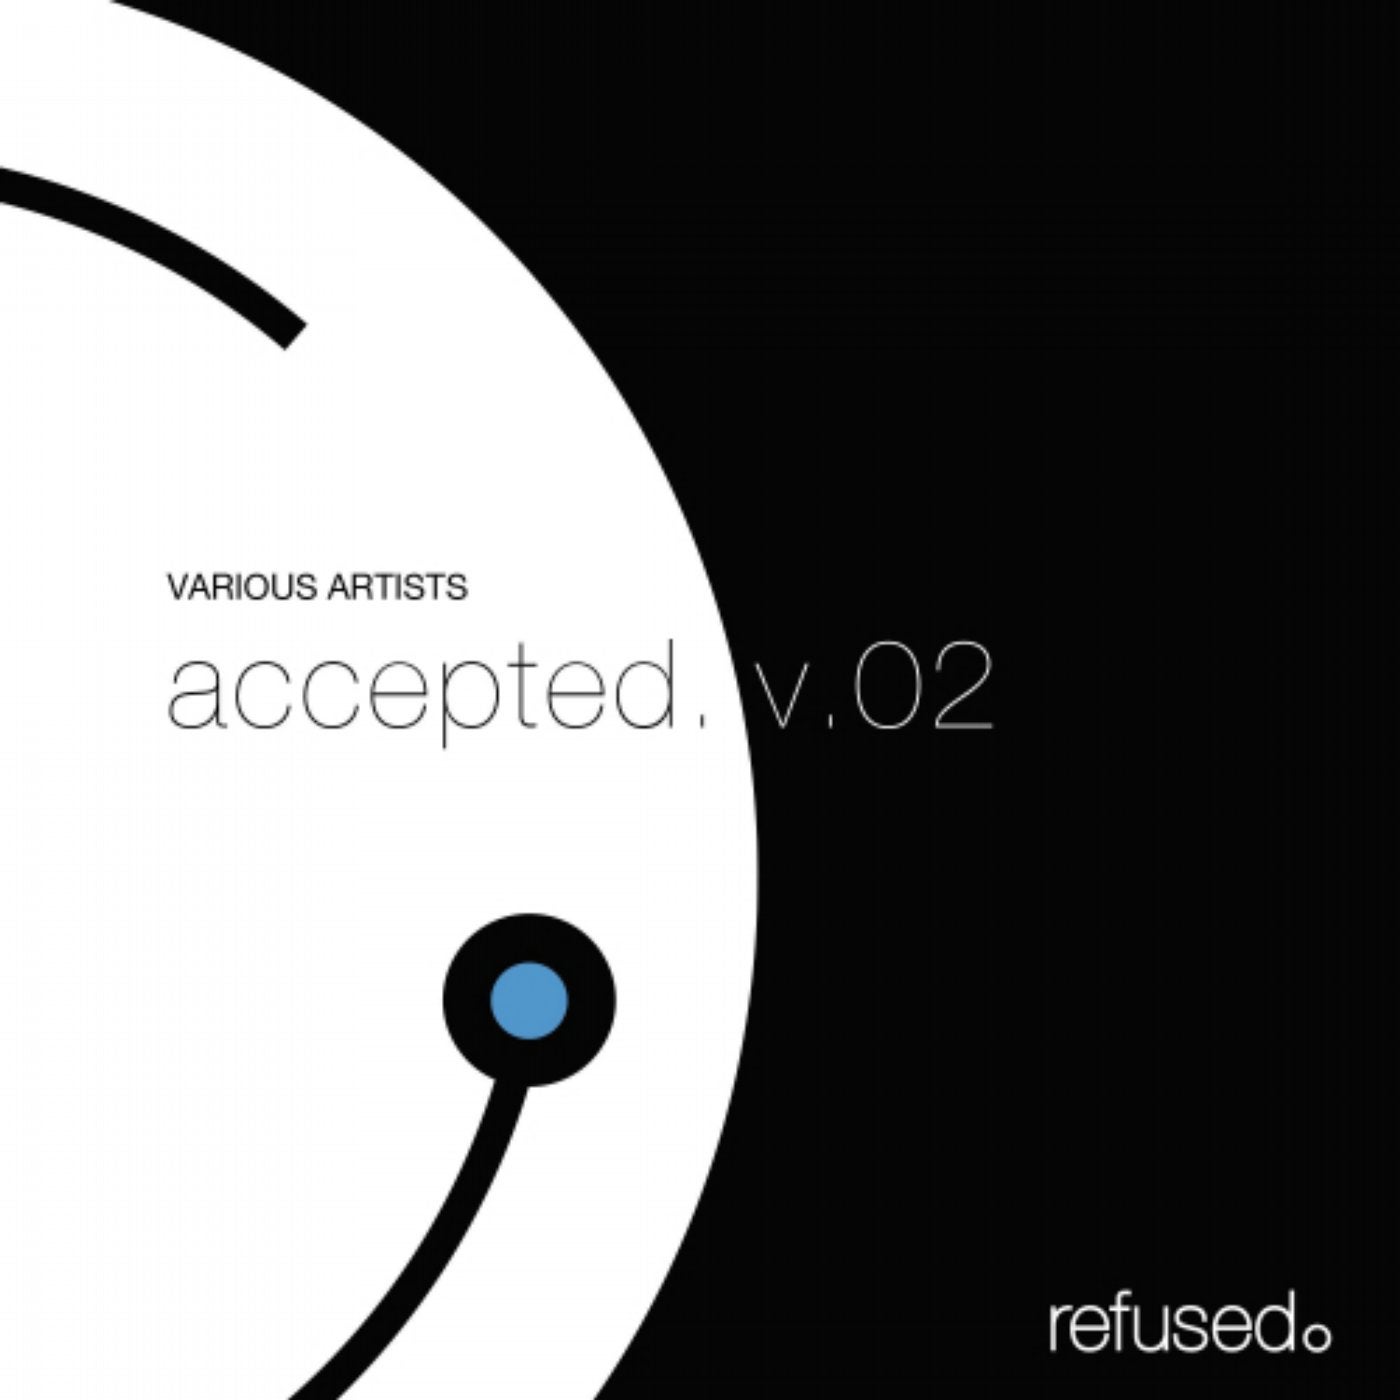 accepted. v.02